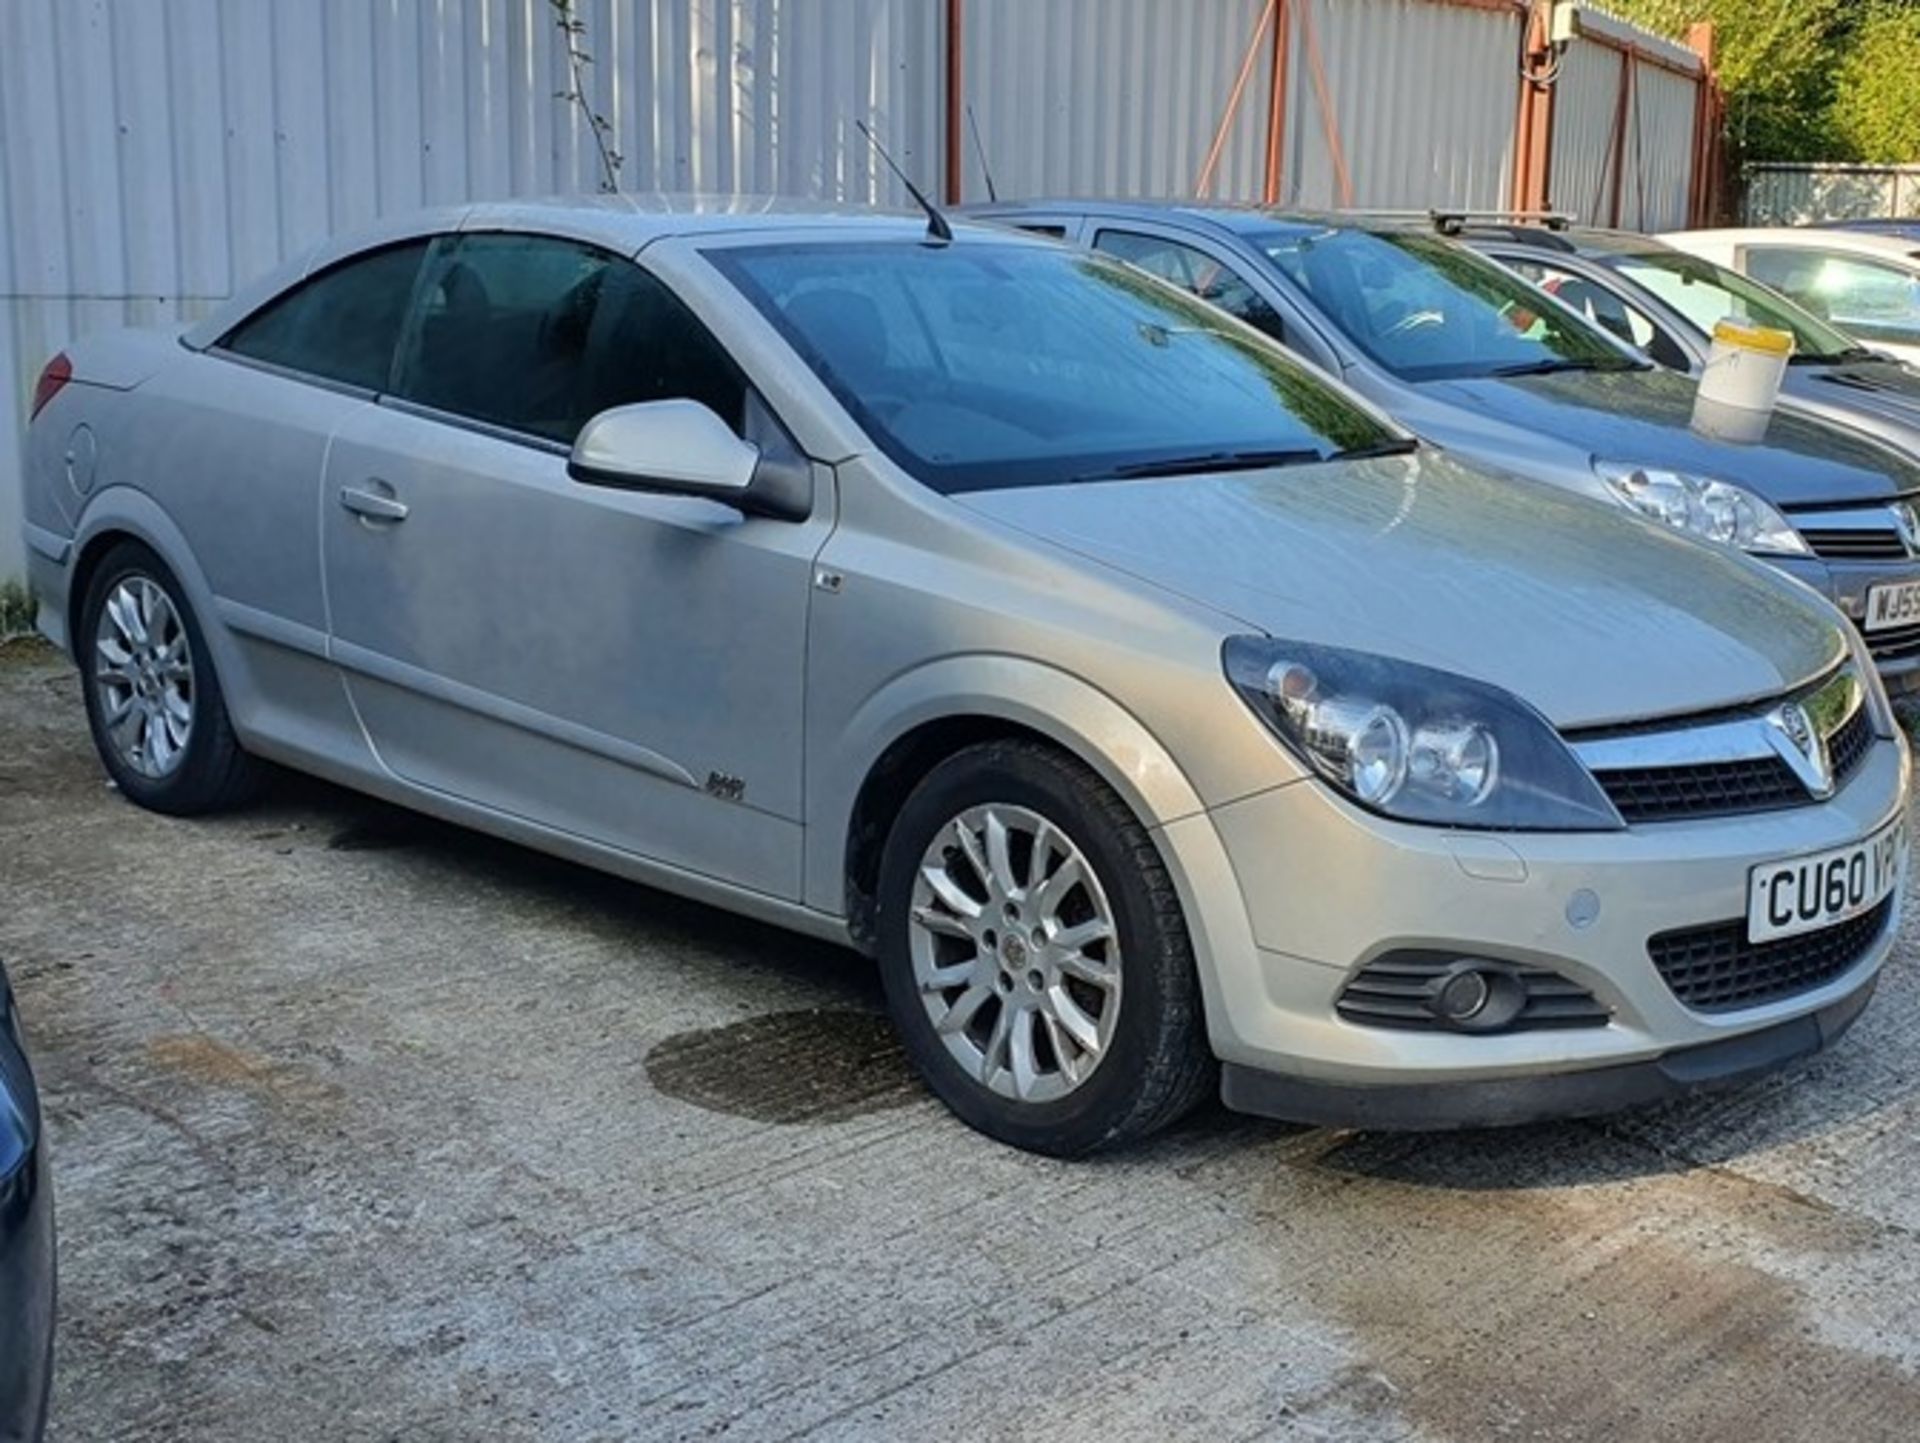 11/60 VAUXHALL ASTRA SPORT - 1796cc 2dr Convertible (Silver, 123k)